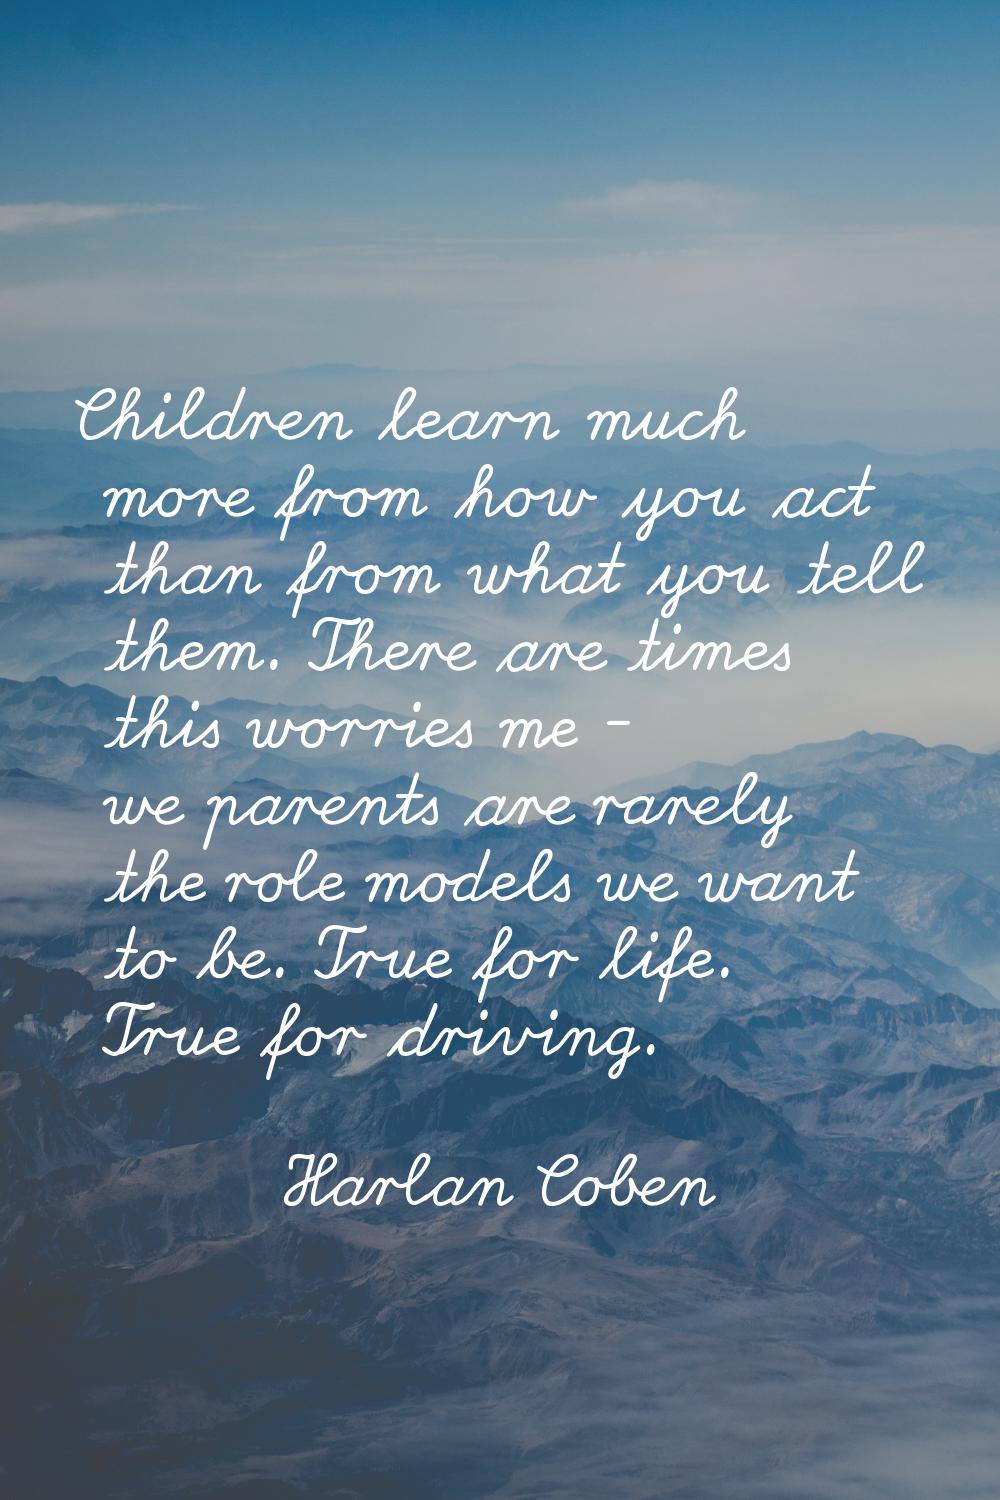 Children learn much more from how you act than from what you tell them. There are times this worrie